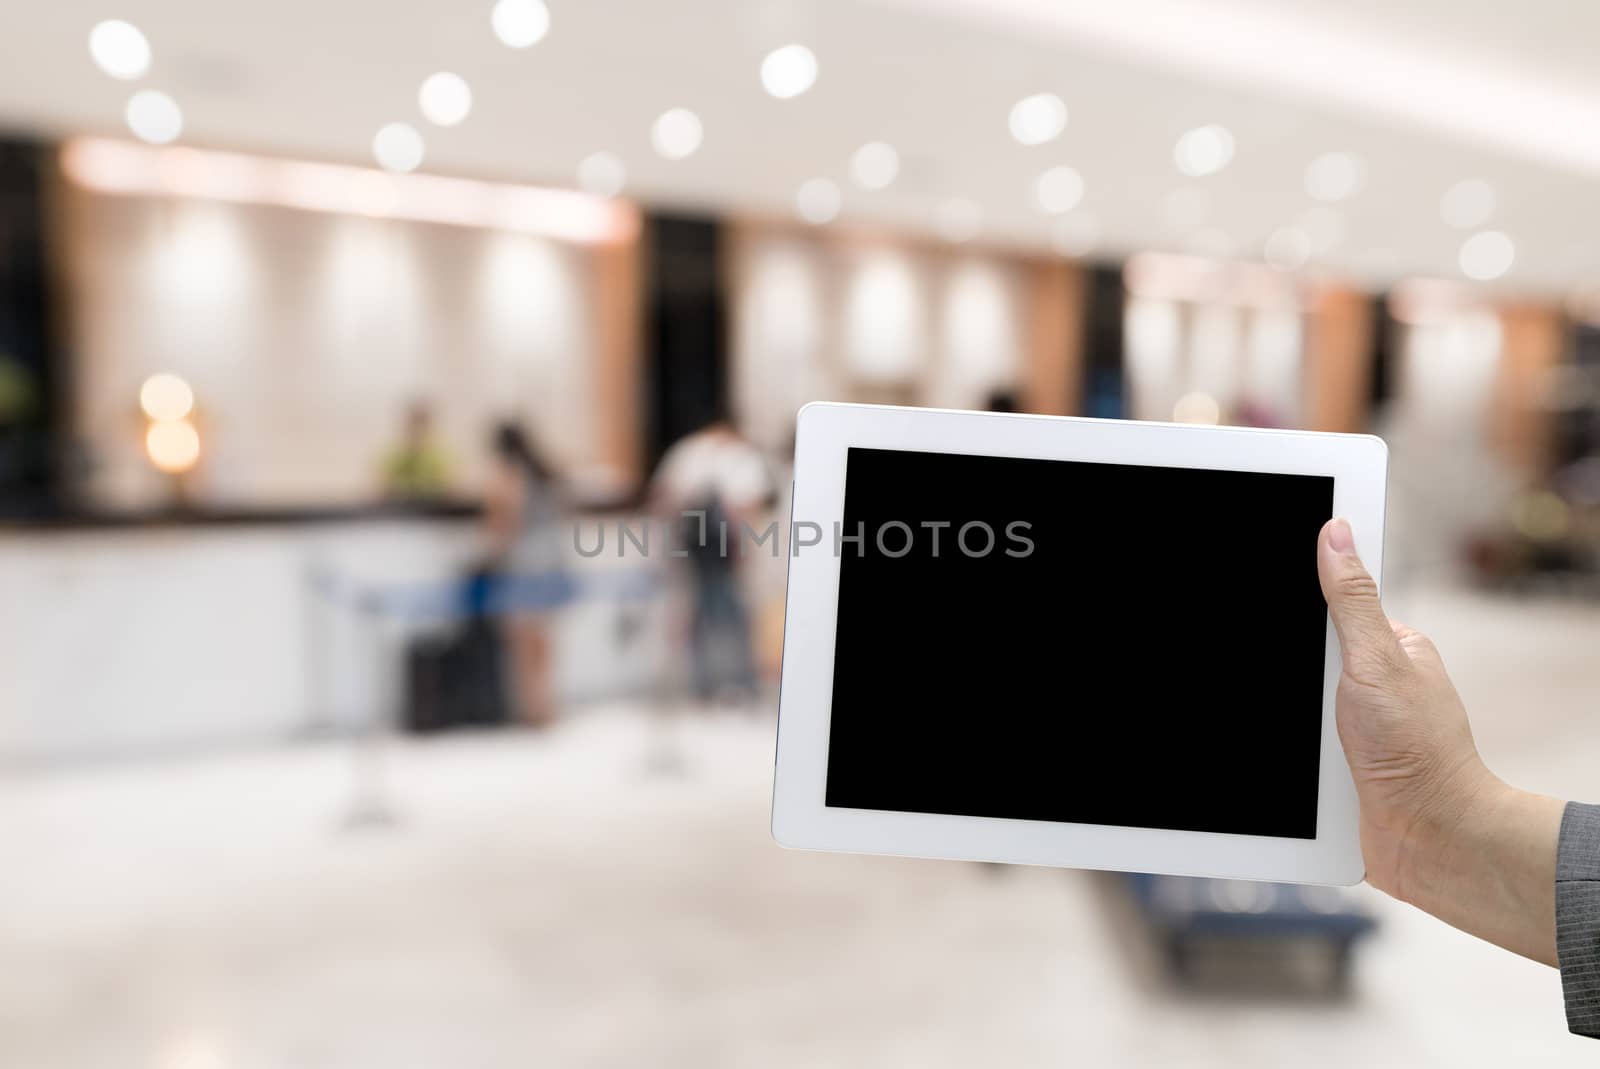 hotel lobby blurred background by vichie81